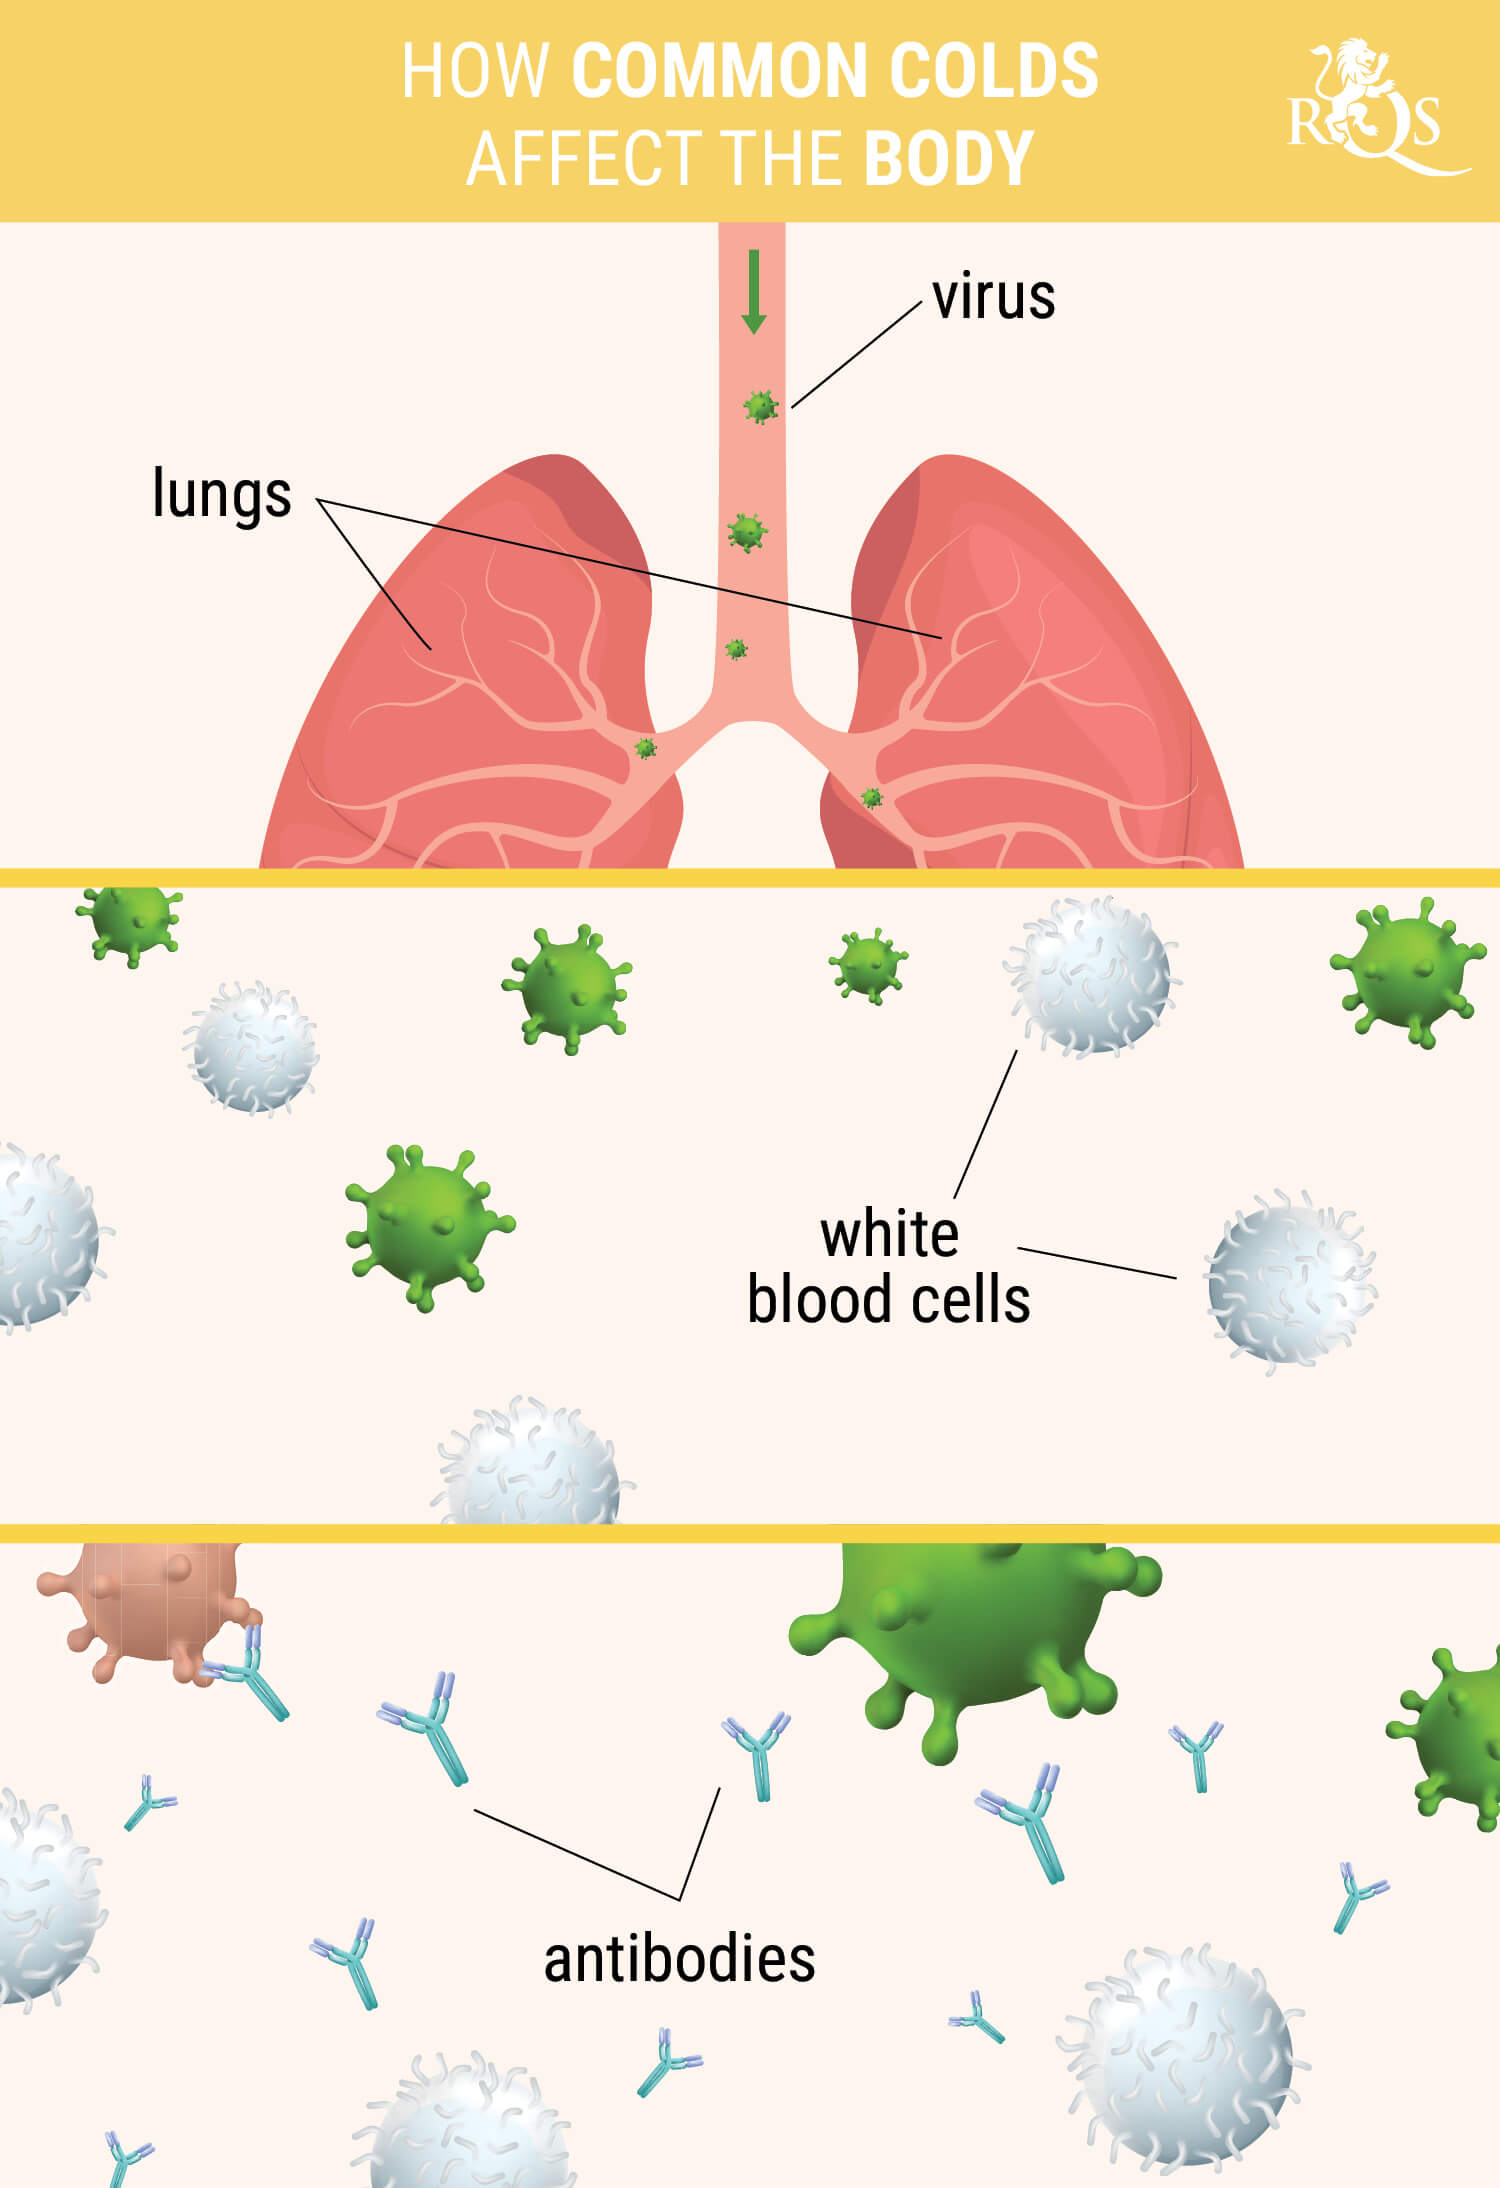 HOW COMMON COLDS AFFECT THE BODY